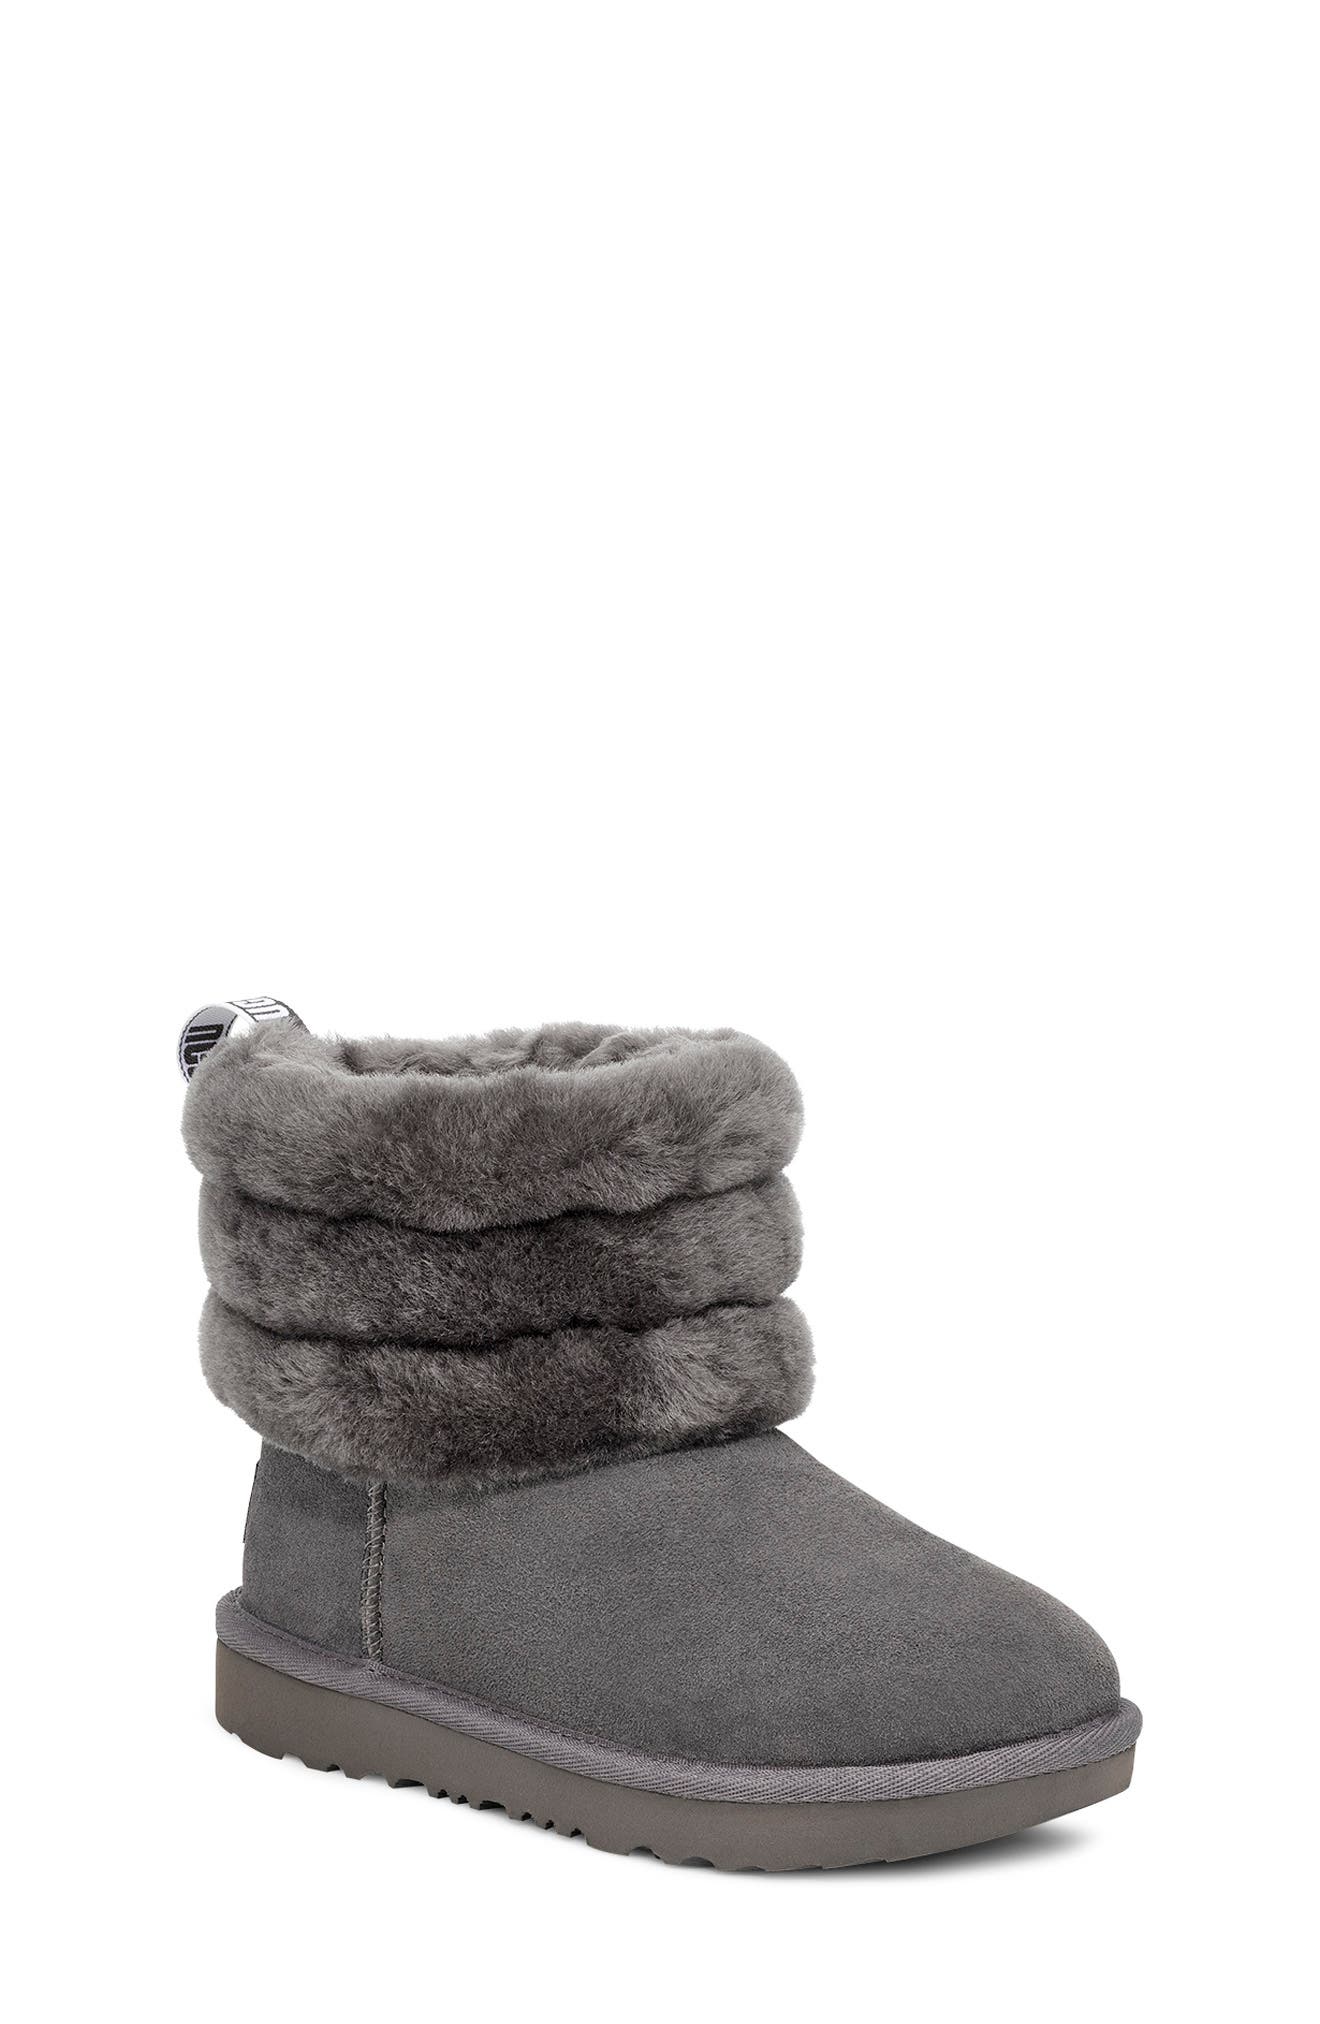 ugg mini quilted boot